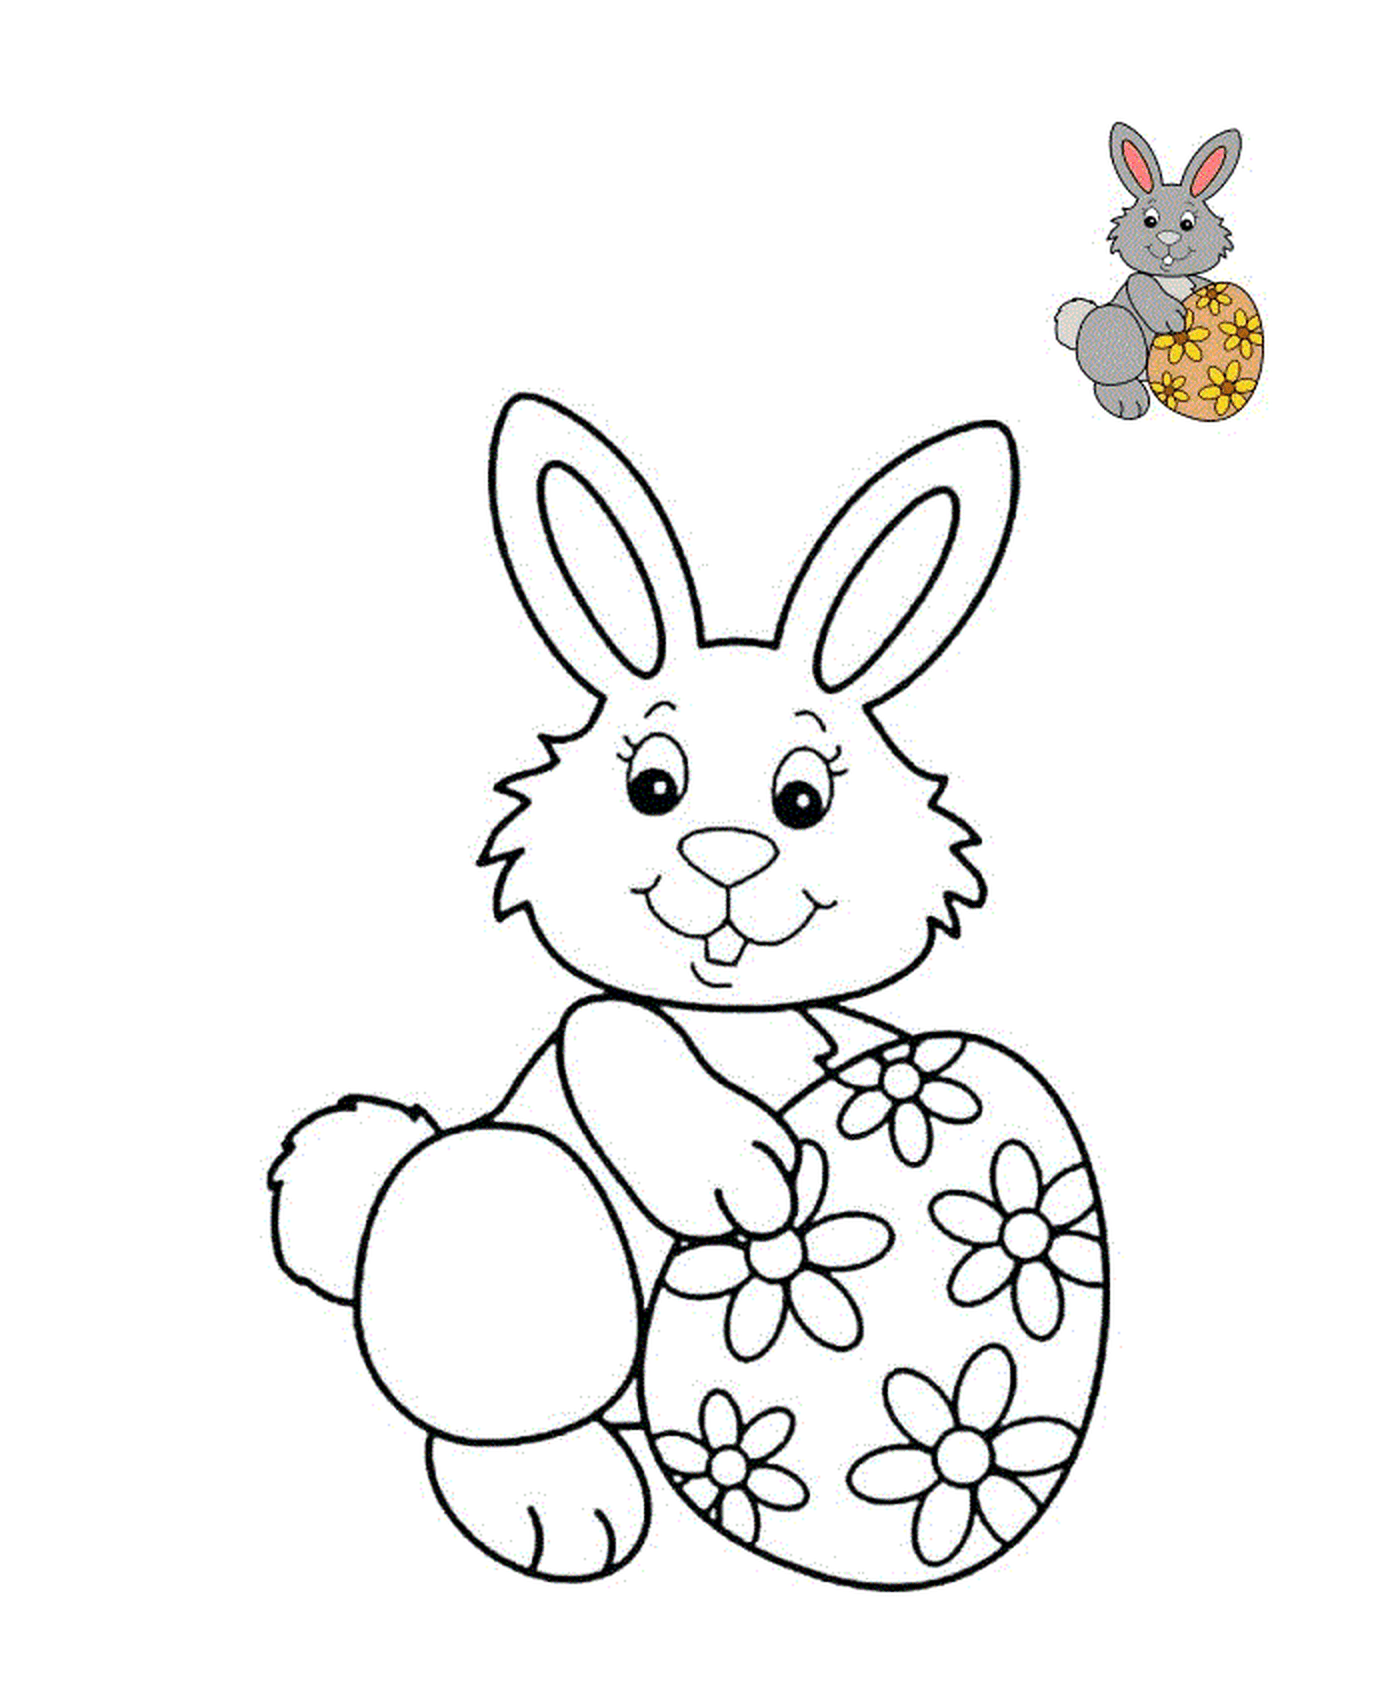  Rabbit with Easter egg decorated 